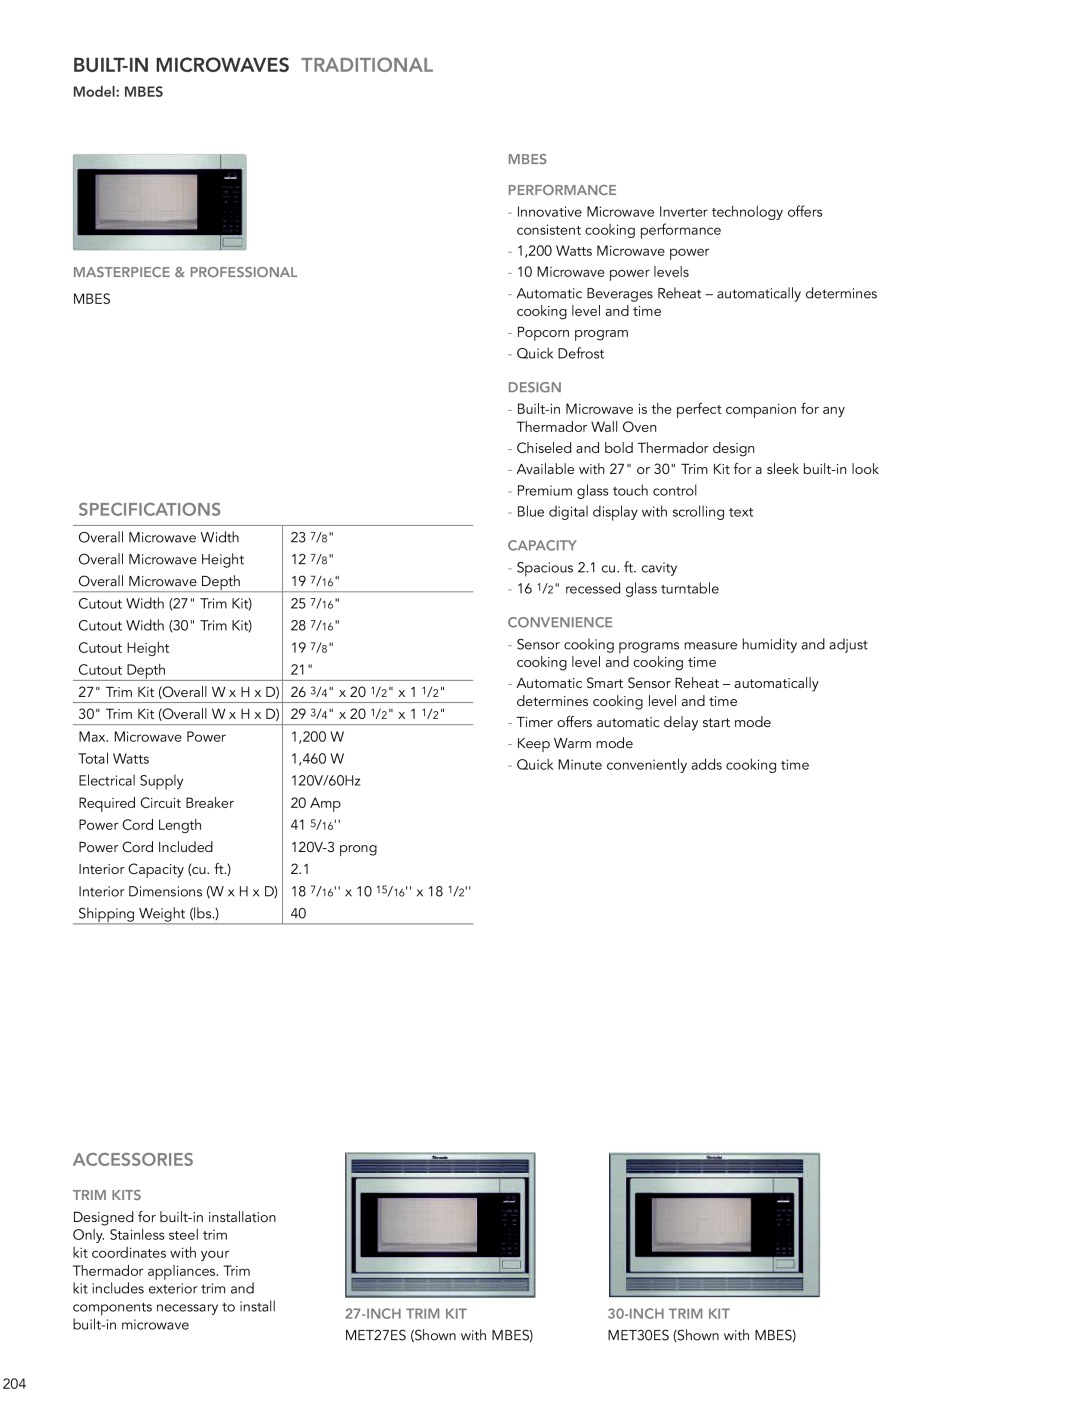 Thermador 200 Built-In Microwaves Traditional, Specifications, Accessories, Model MBES, Masterpiece & Professional, DESIgN 